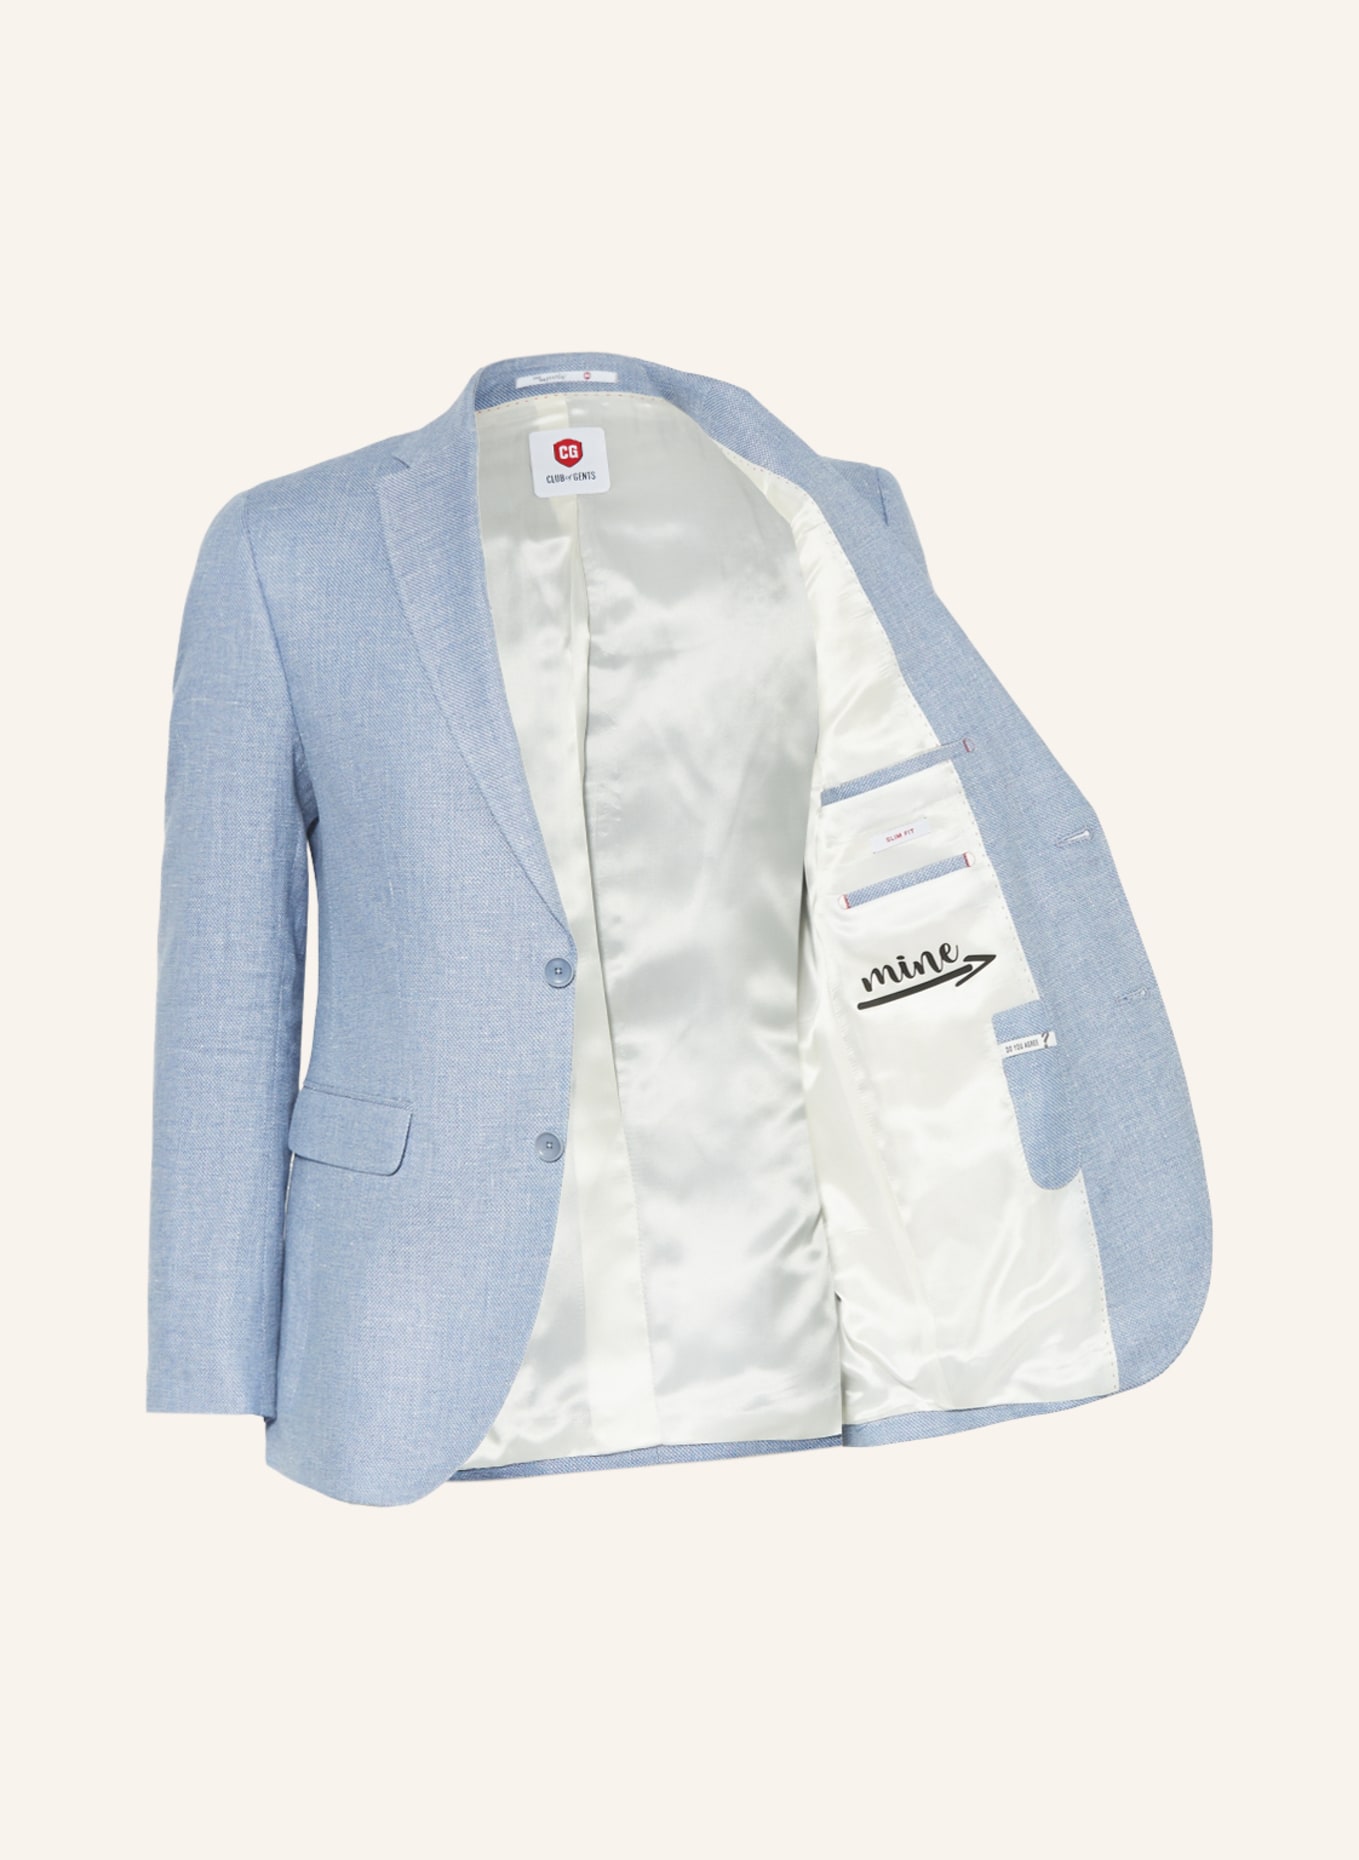 CG - CLUB of GENTS Suit jacket CG PAUL slim fit with linen, Color: 61 BLAU HELL (Image 5)